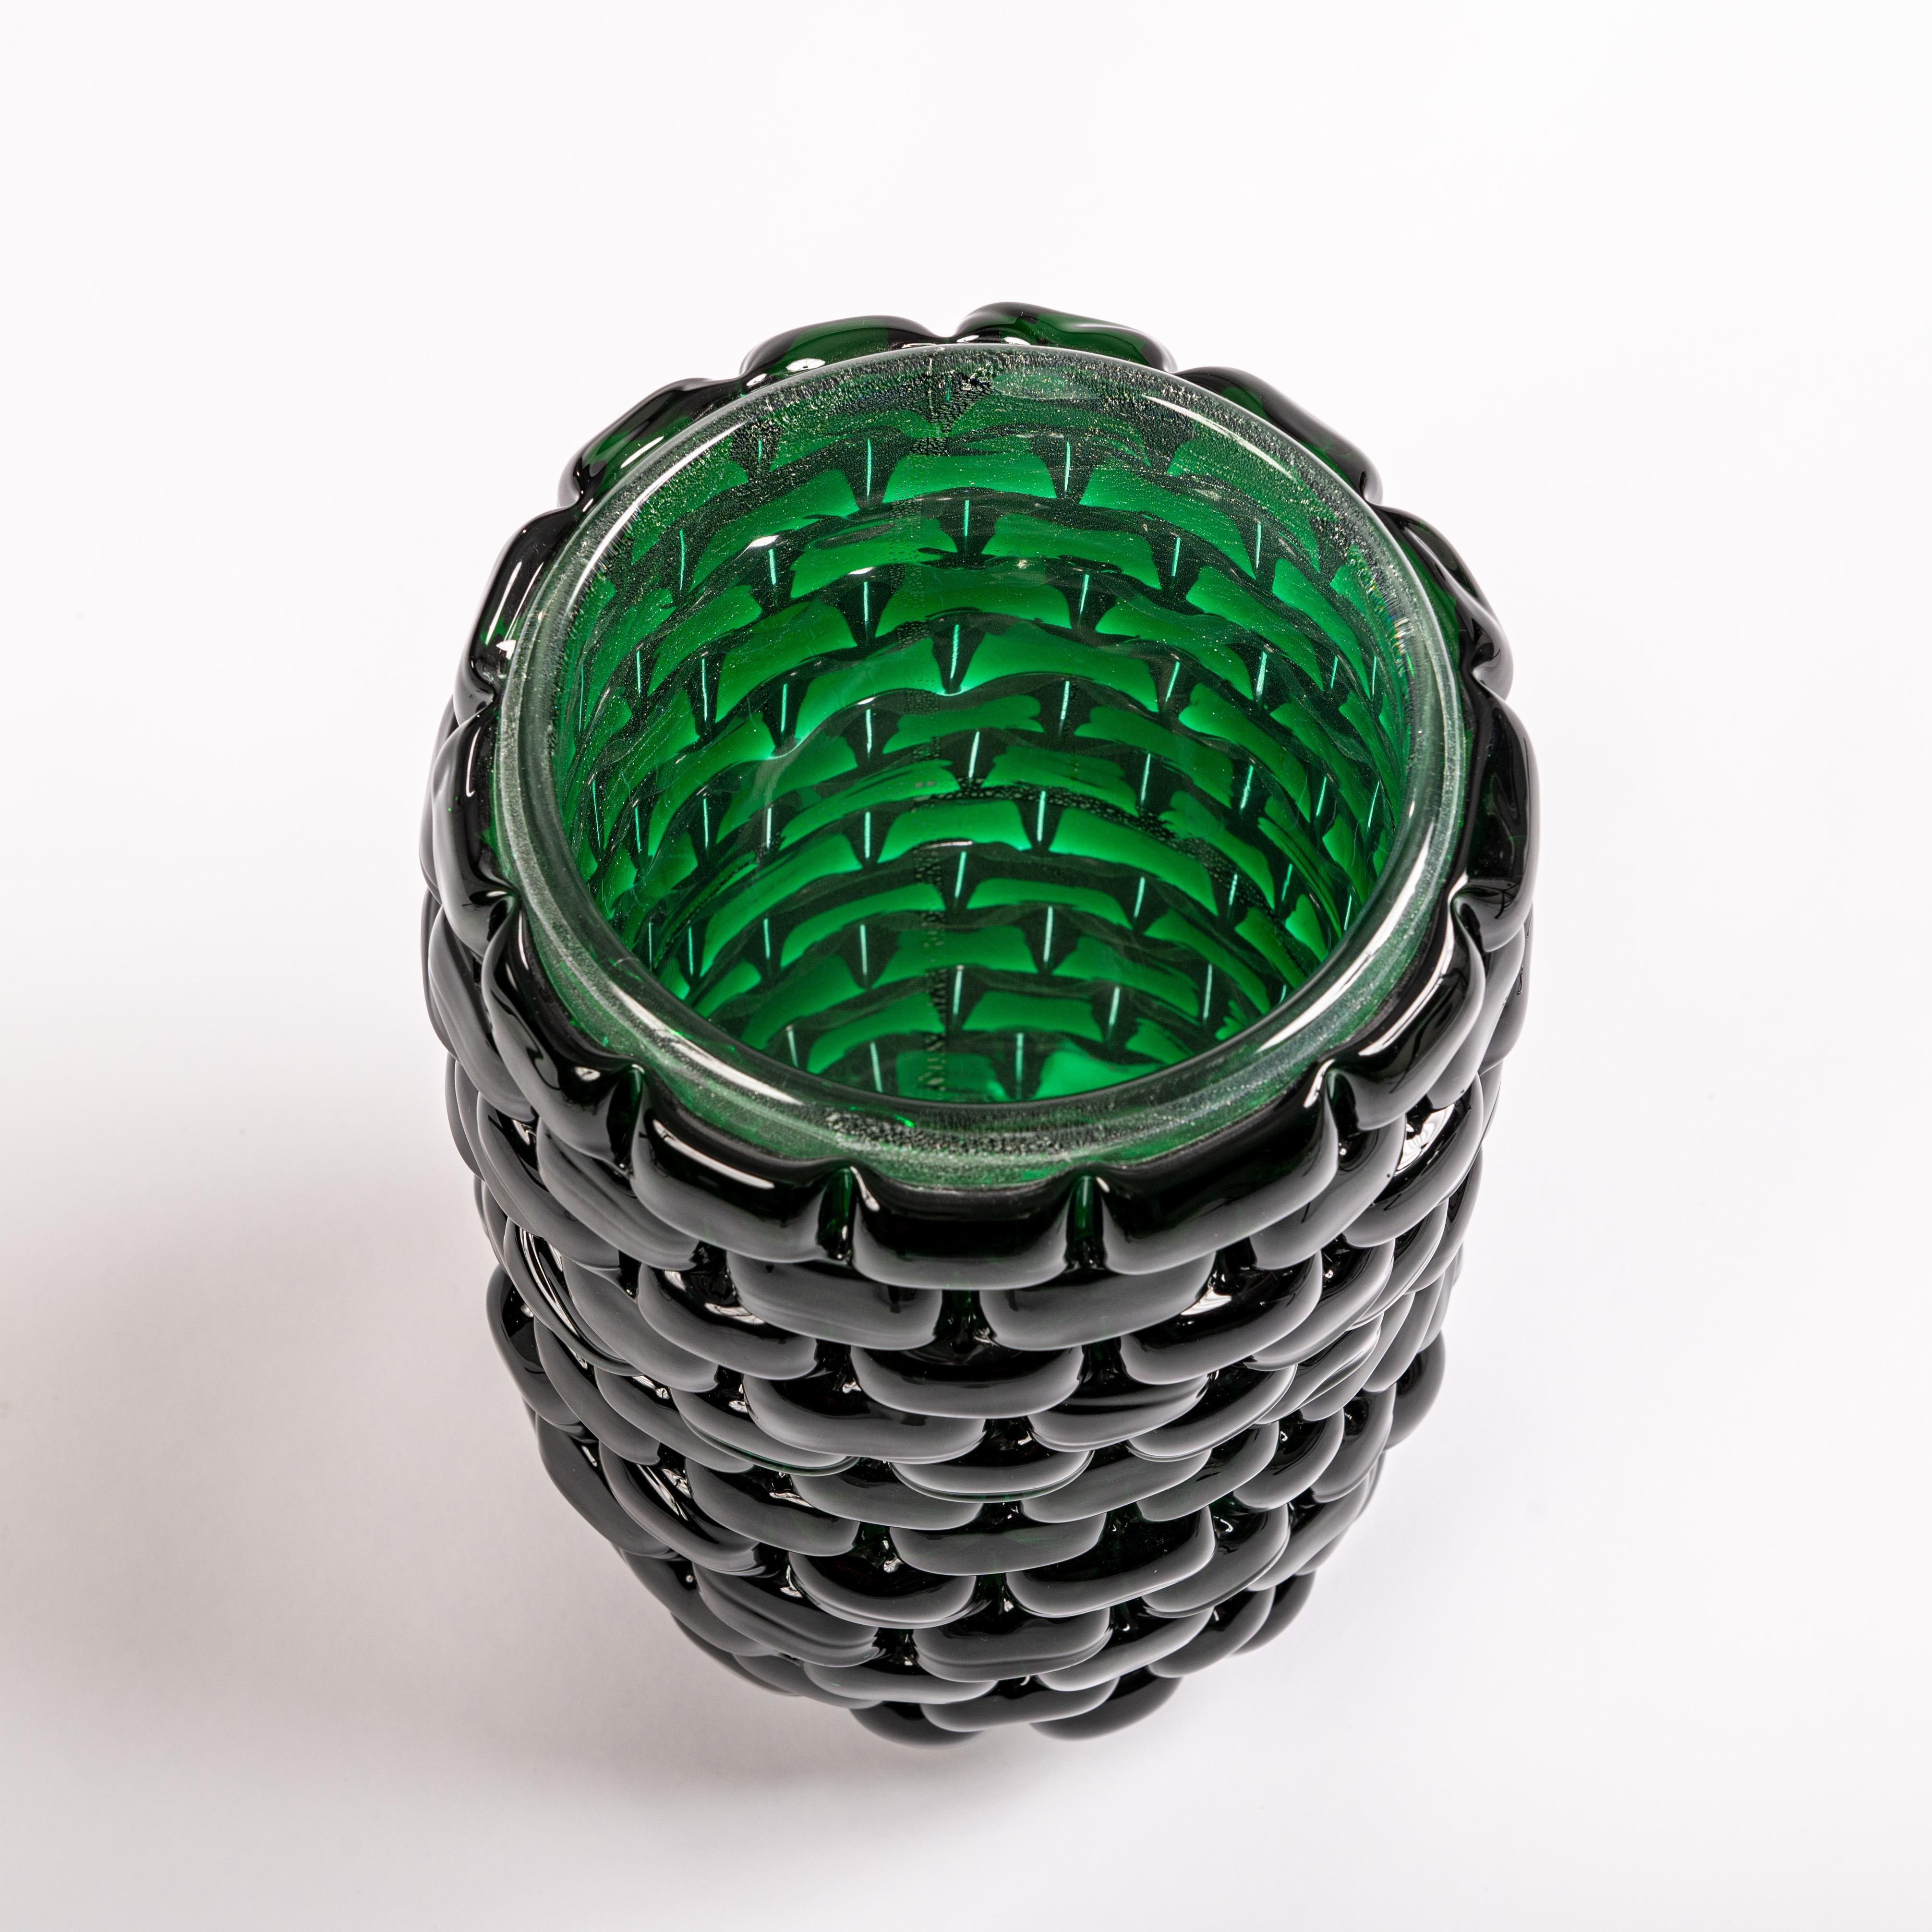 Contemporary venetian modernist vase signed cenedese with an interesting elongated modern organic shape, in a sophisticated 
bottle green color with sculptural interruptions that make the outside appear as if covered with stones - creating an